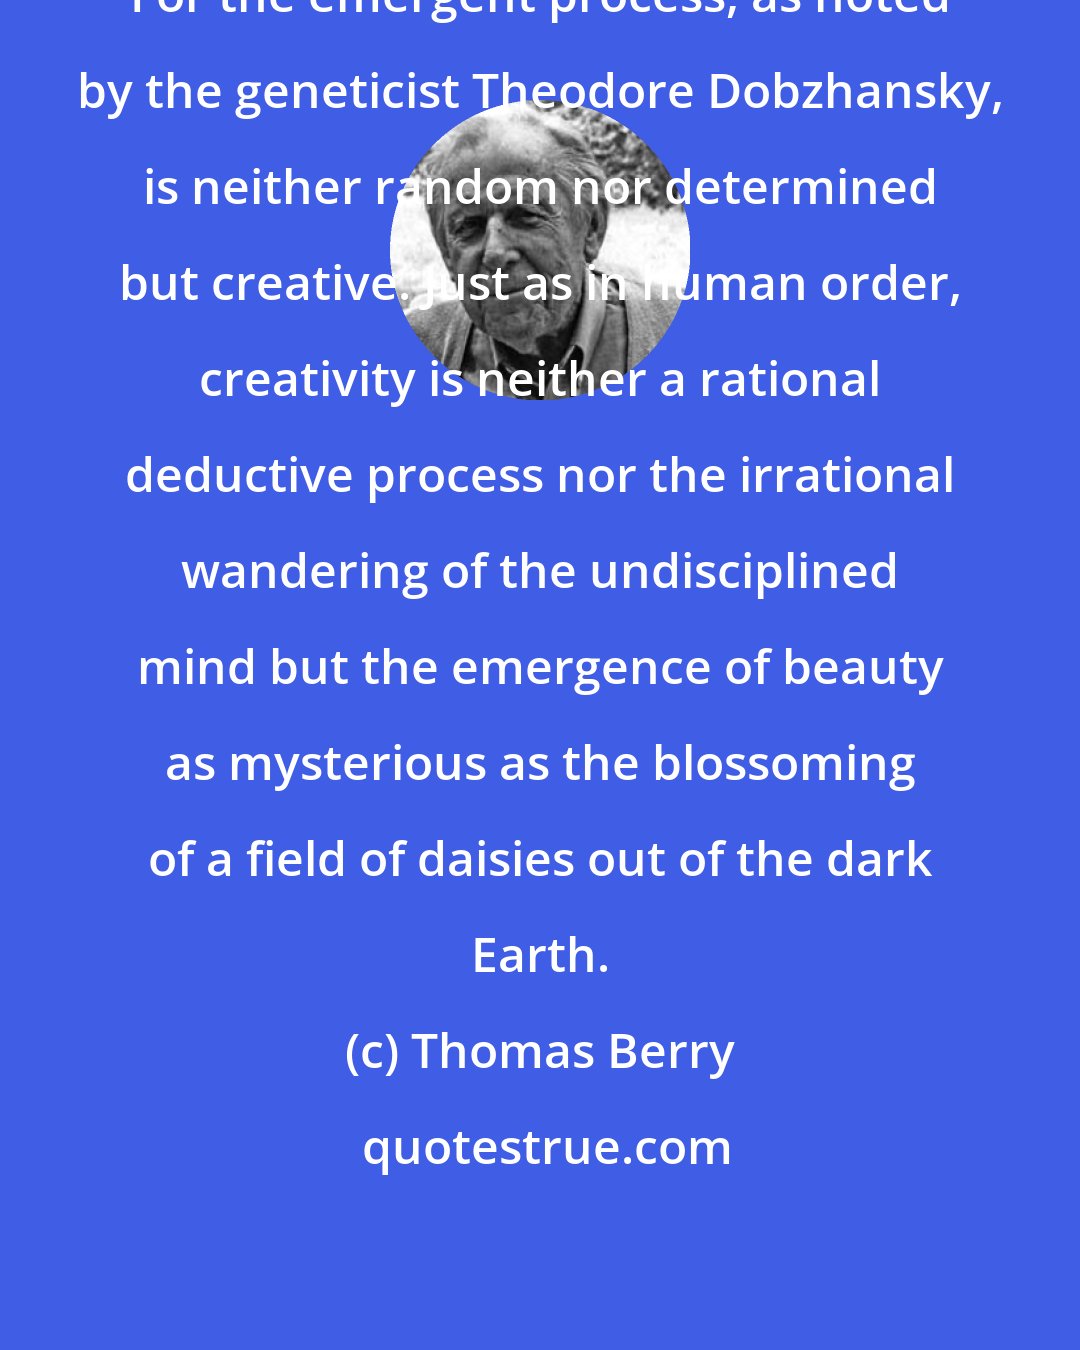 Thomas Berry: For the emergent process, as noted by the geneticist Theodore Dobzhansky, is neither random nor determined but creative. Just as in human order, creativity is neither a rational deductive process nor the irrational wandering of the undisciplined mind but the emergence of beauty as mysterious as the blossoming of a field of daisies out of the dark Earth.